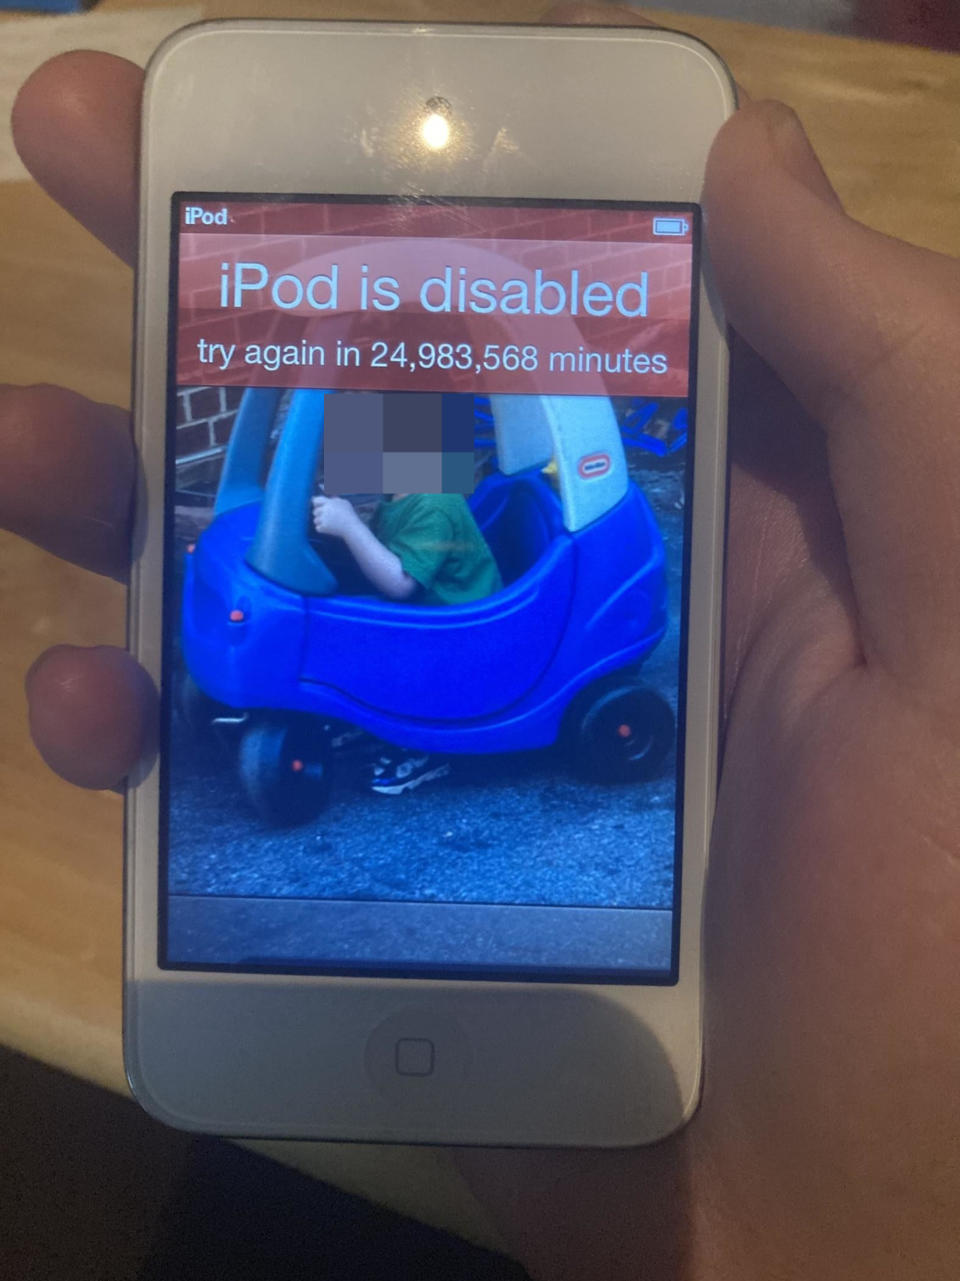 A screen on an iPod saying to use again in "24,983,568 minutes."